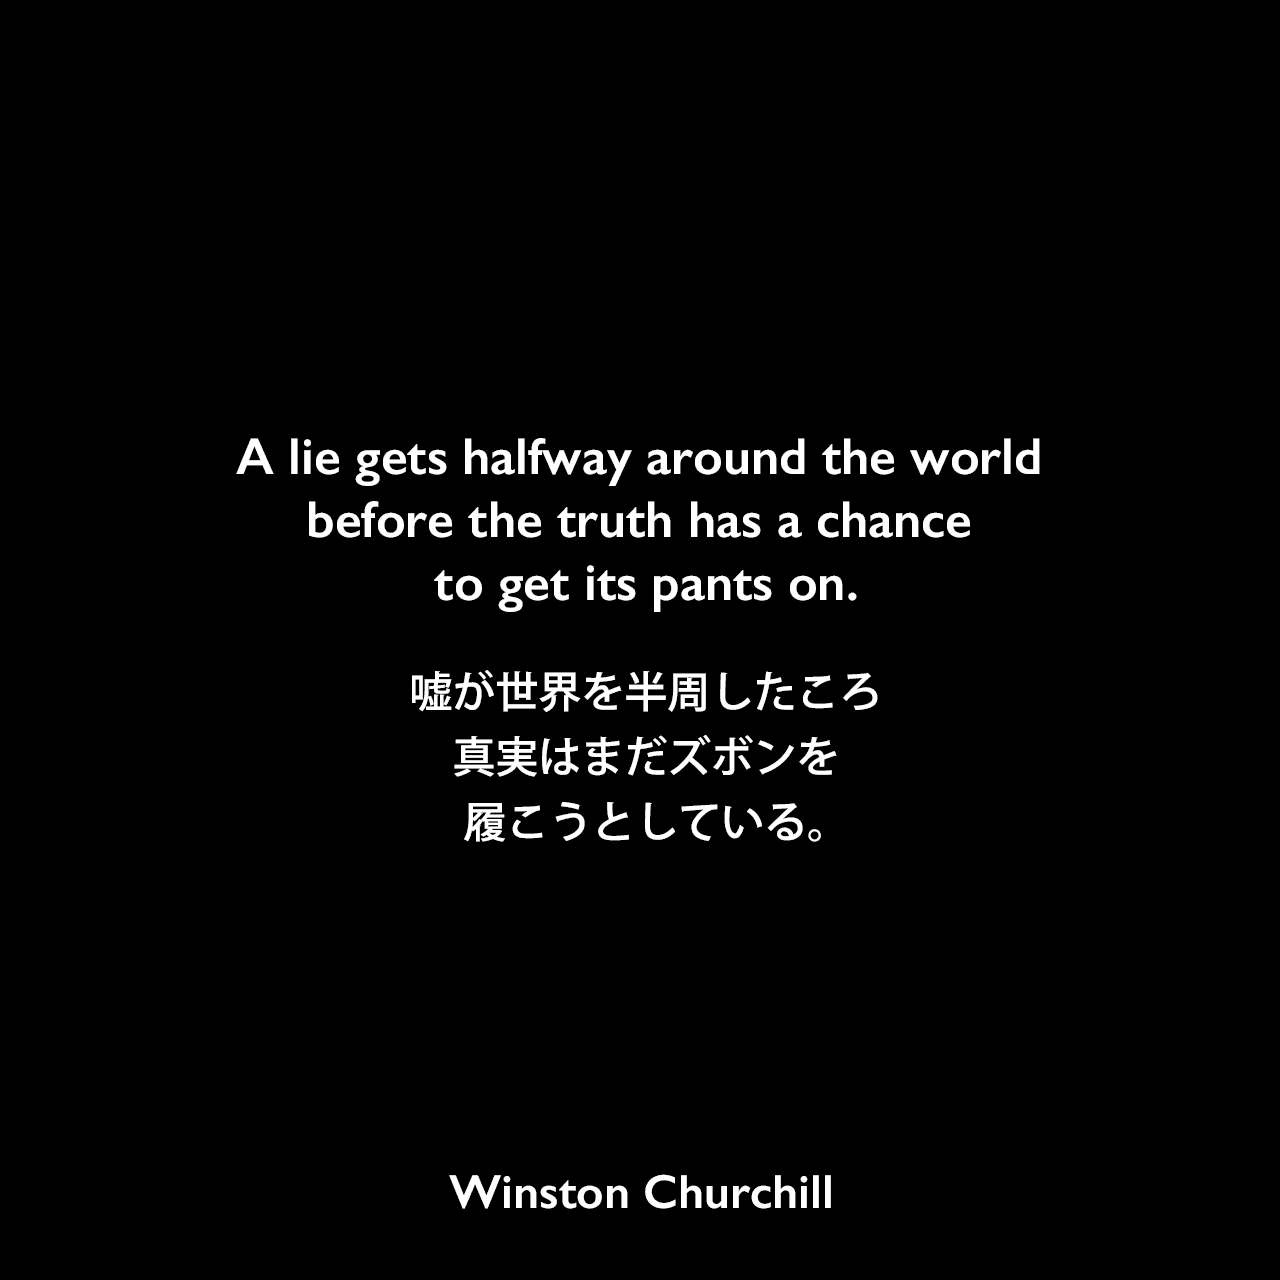 A lie gets halfway around the world before the truth has a chance to get its pants on.嘘が世界を半周したころ、真実はまだズボンを履こうとしている。Winston Churchill